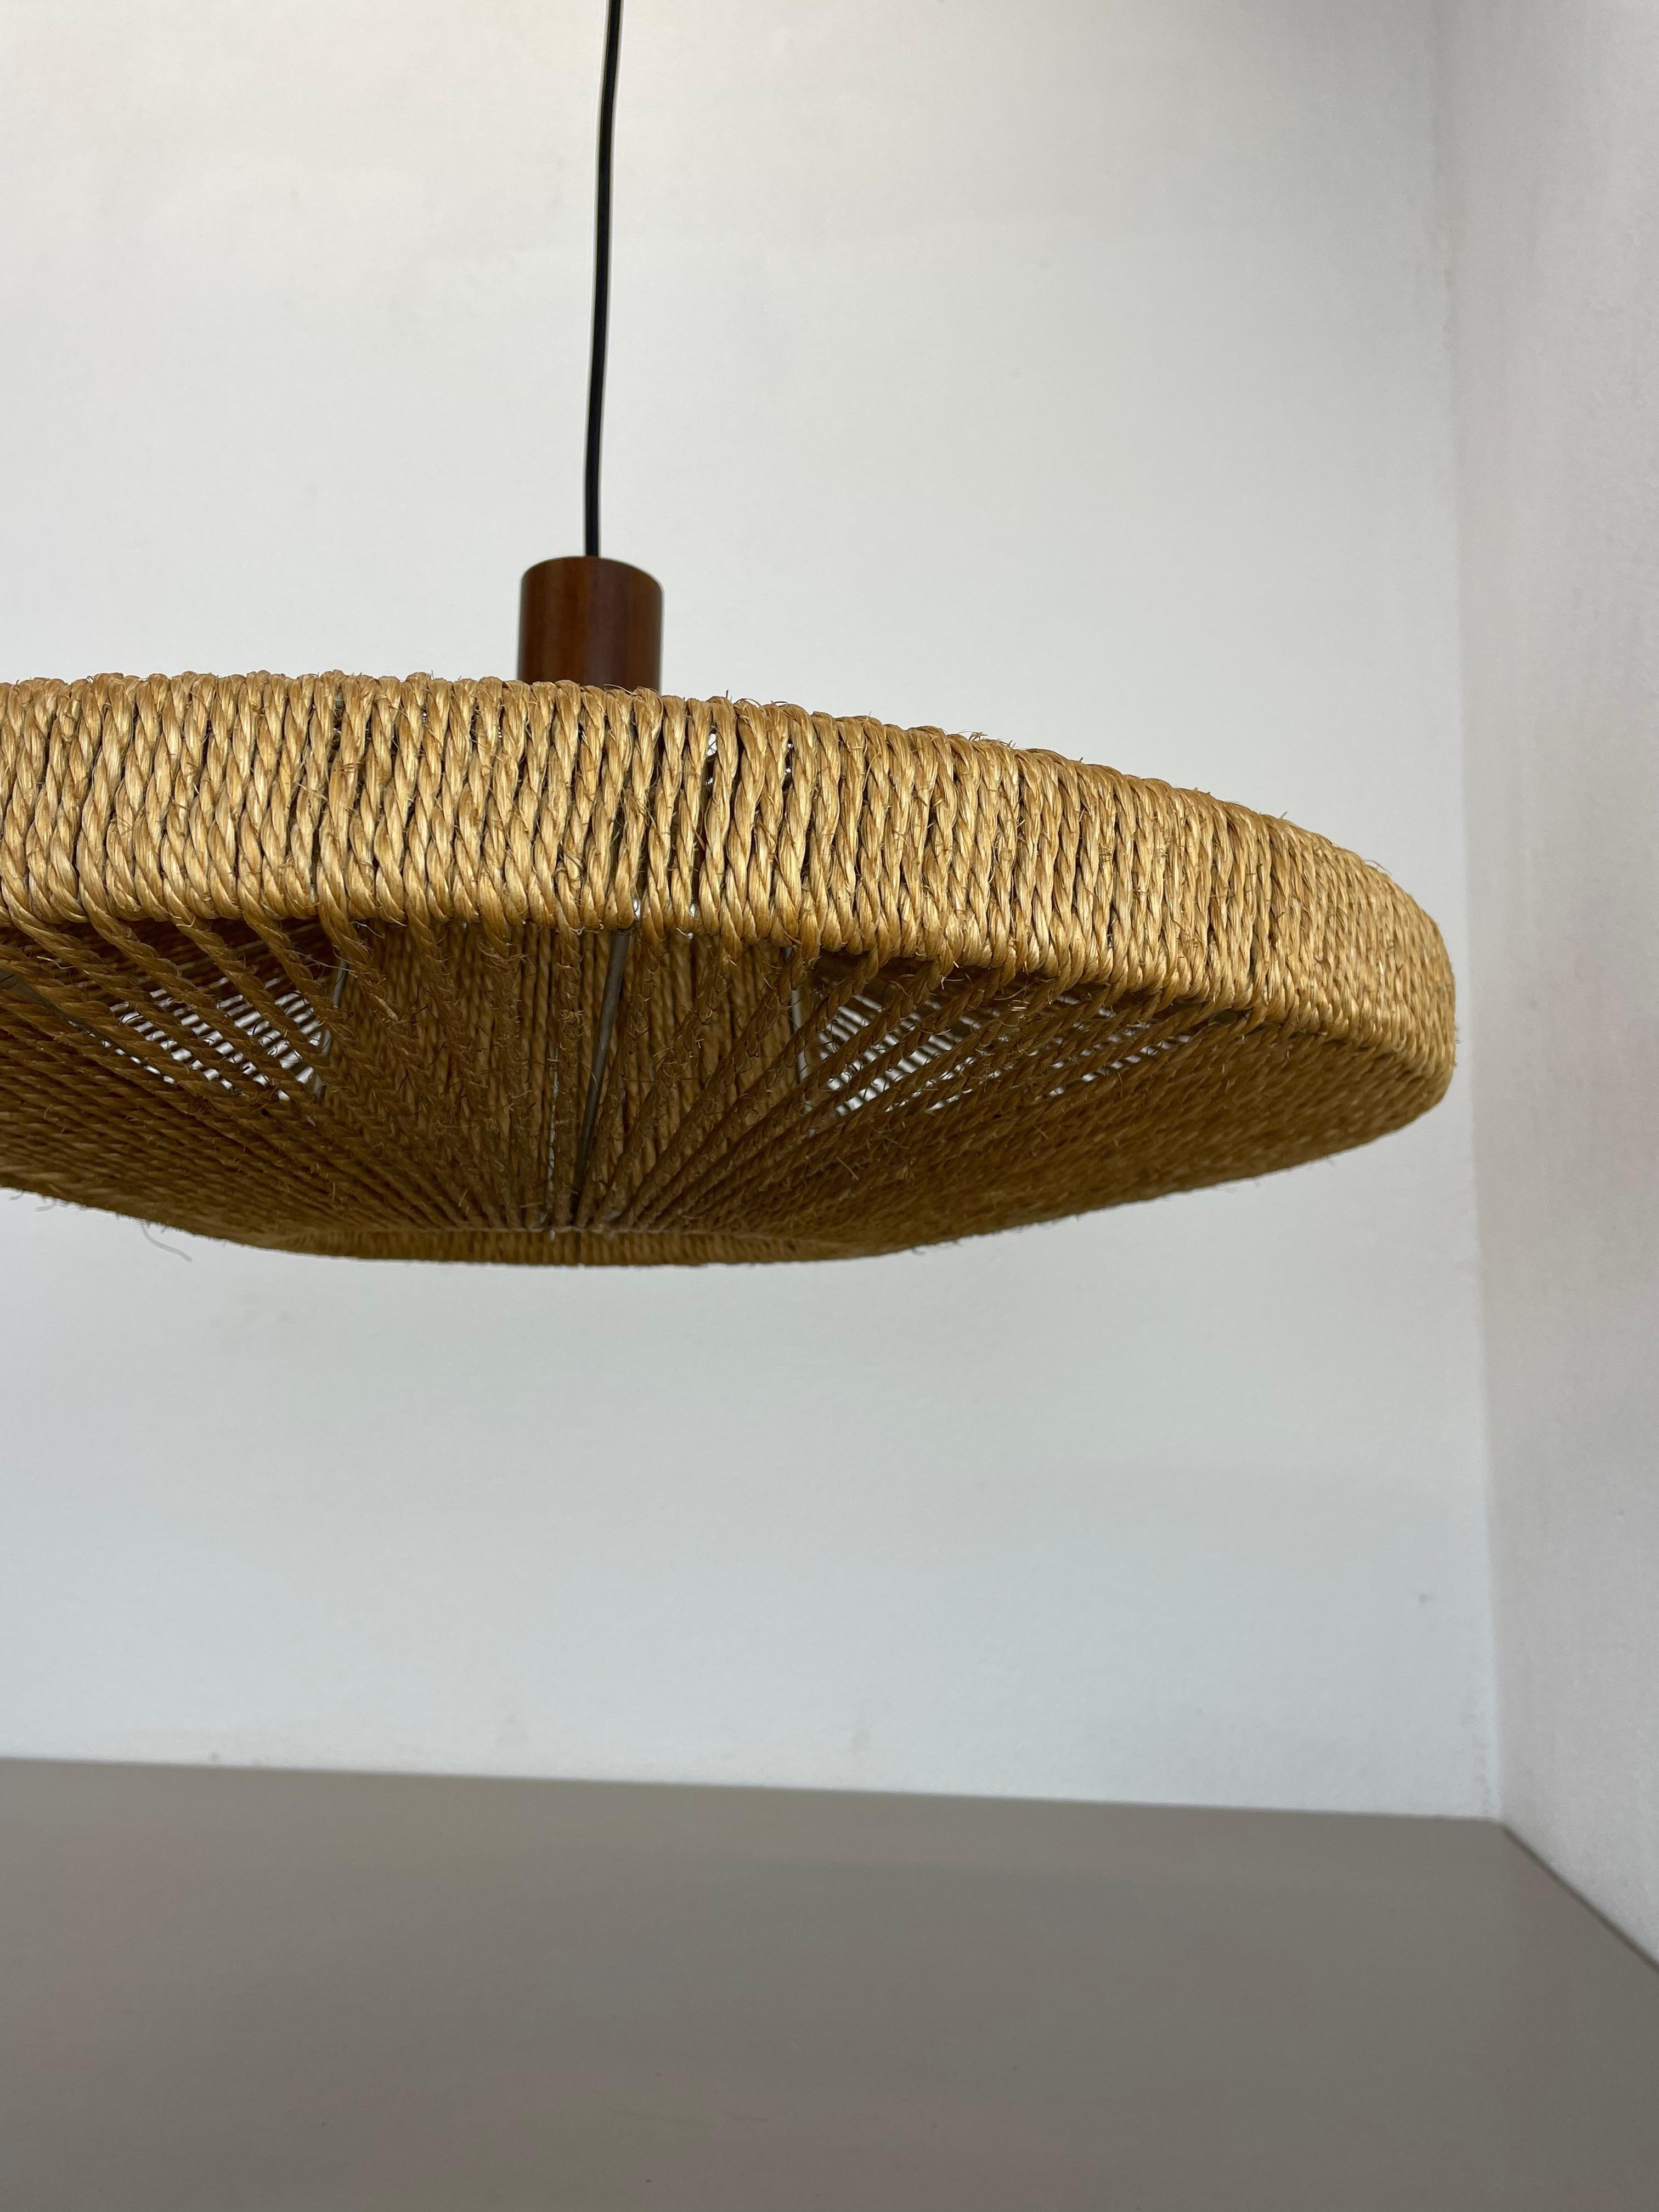 20th Century 56cm Organic Sisal and Teak Ufo Hanging Light Made by Temde Lights Germany 1960s For Sale